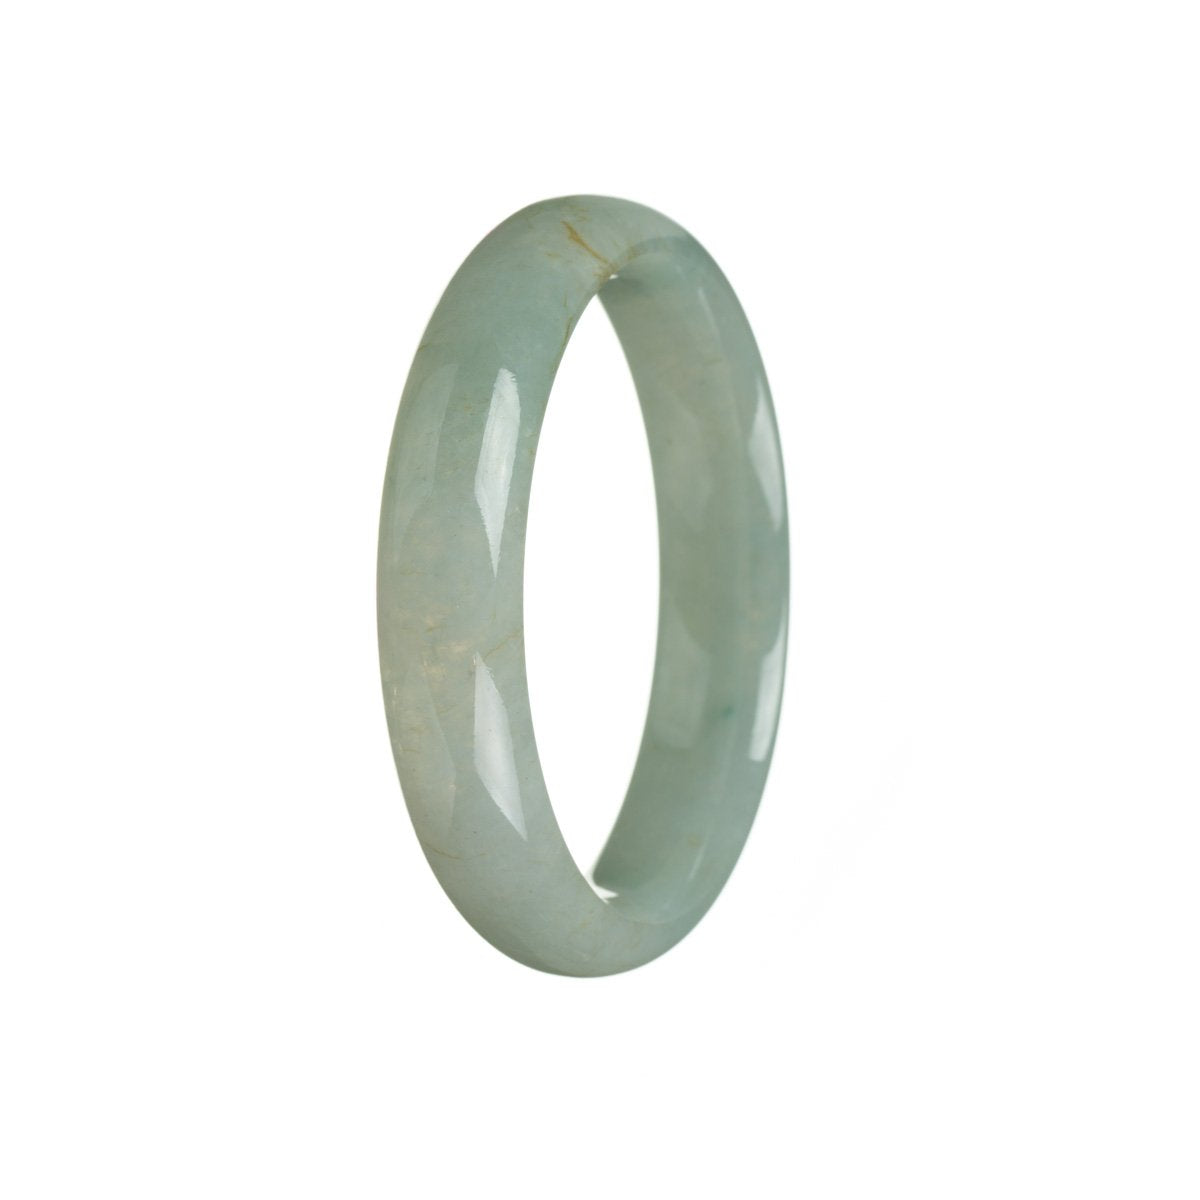 A half moon-shaped green jade bracelet with a genuine grade A traditional design, measuring 56mm. Perfect for adding a touch of elegance to any outfit.